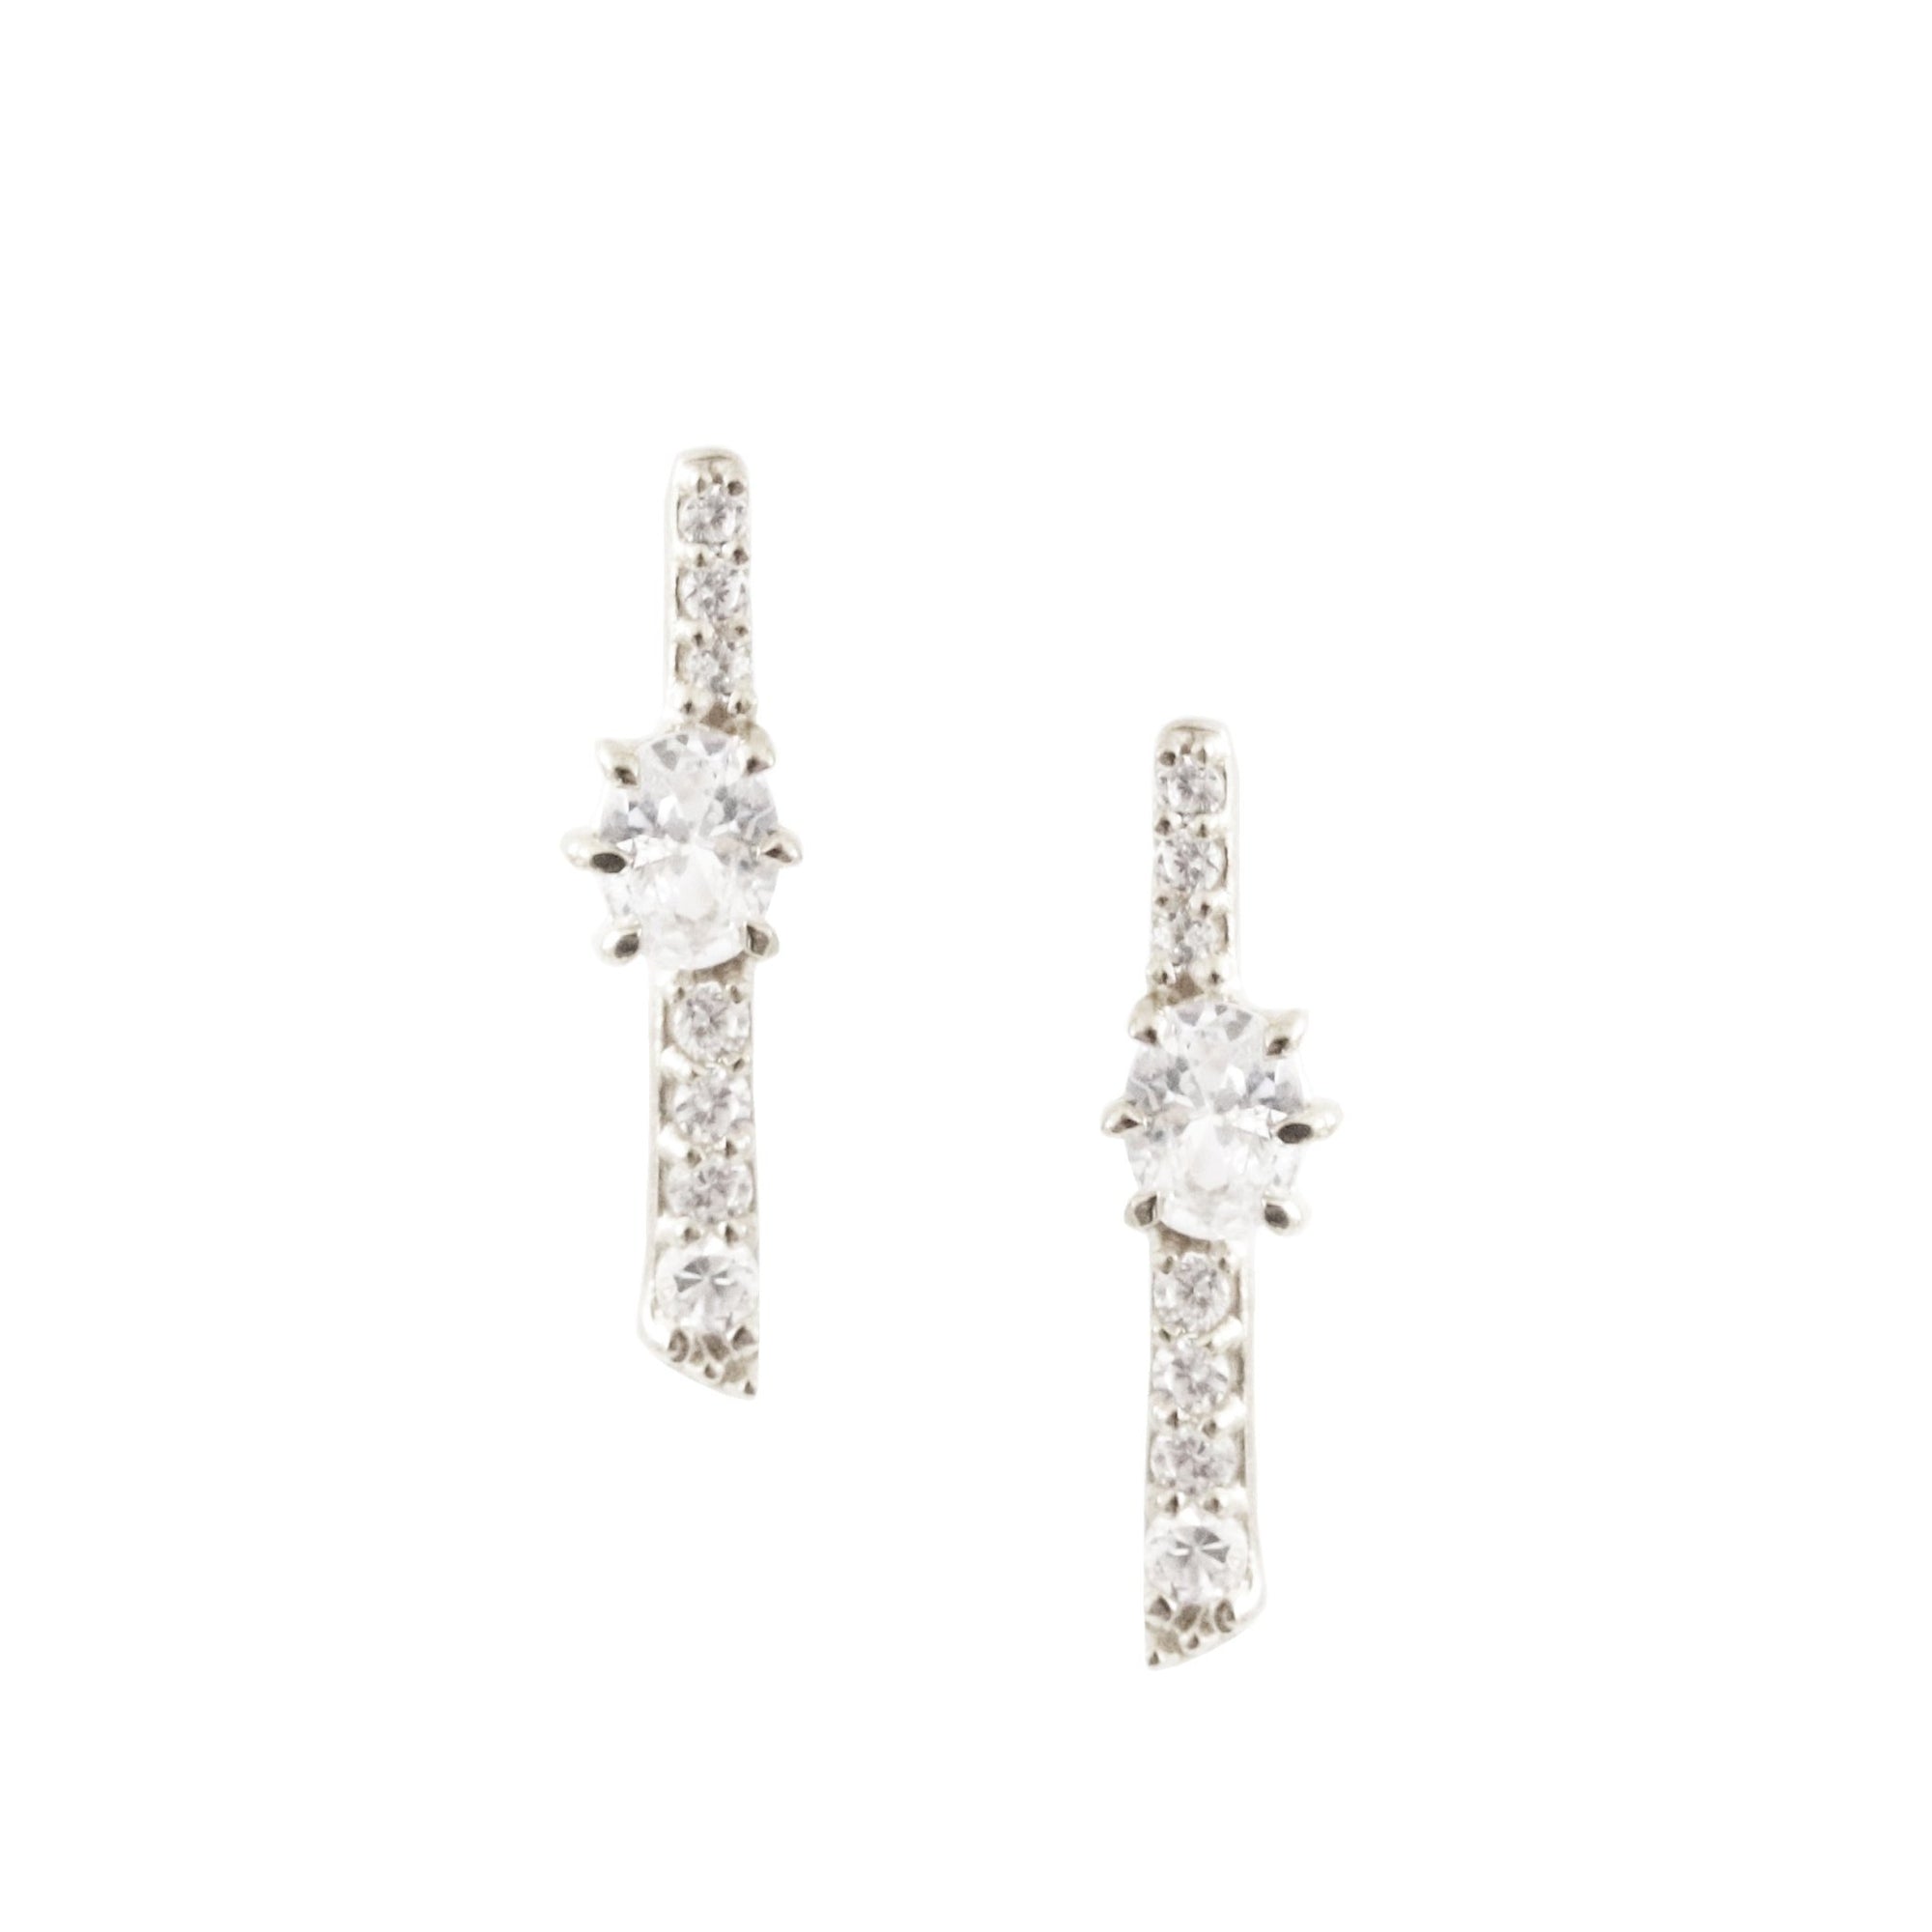 DAINTY KIND OVAL BAR STUDS - CUBIC ZIRCONIA & SILVER - SO PRETTY CARA COTTER